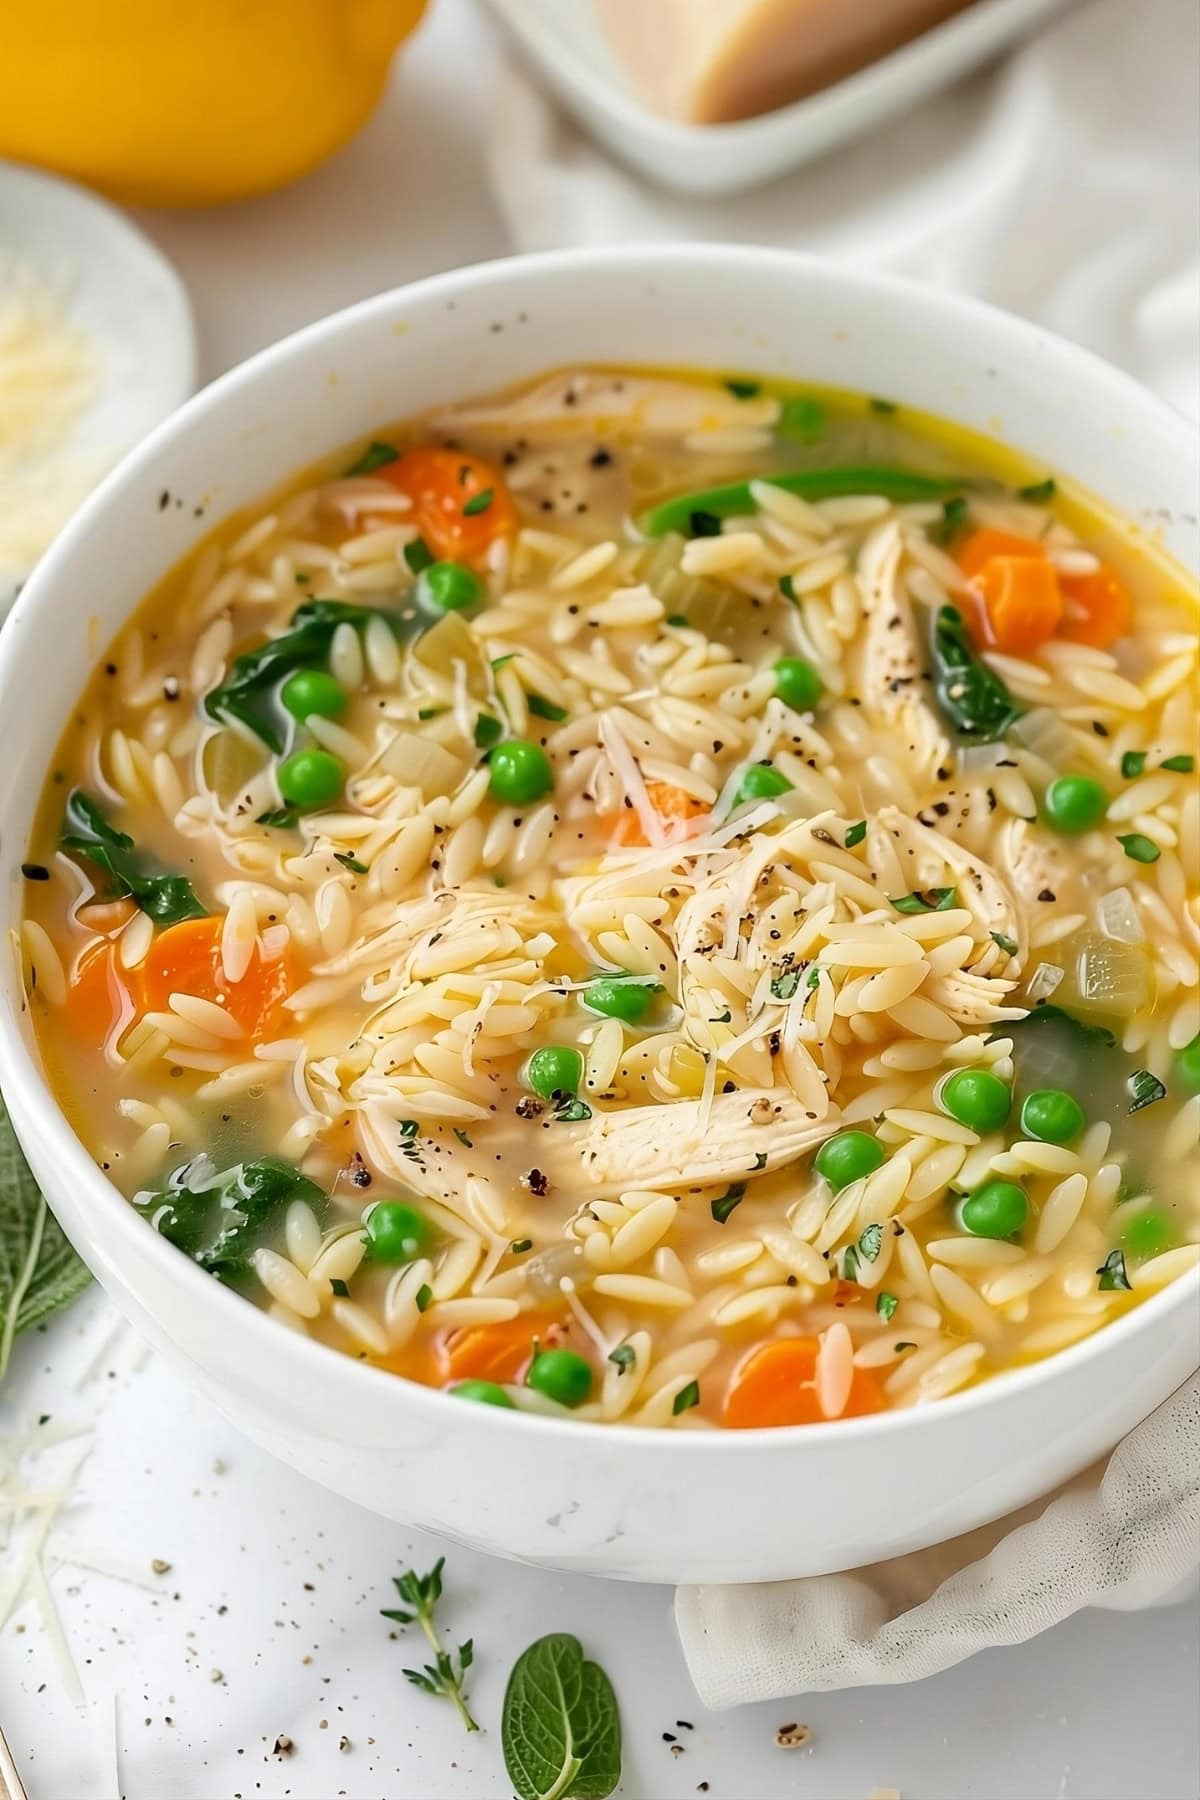 Chicken soup with orzo pasta, carrots, green peas and spinach served in a white bowl.